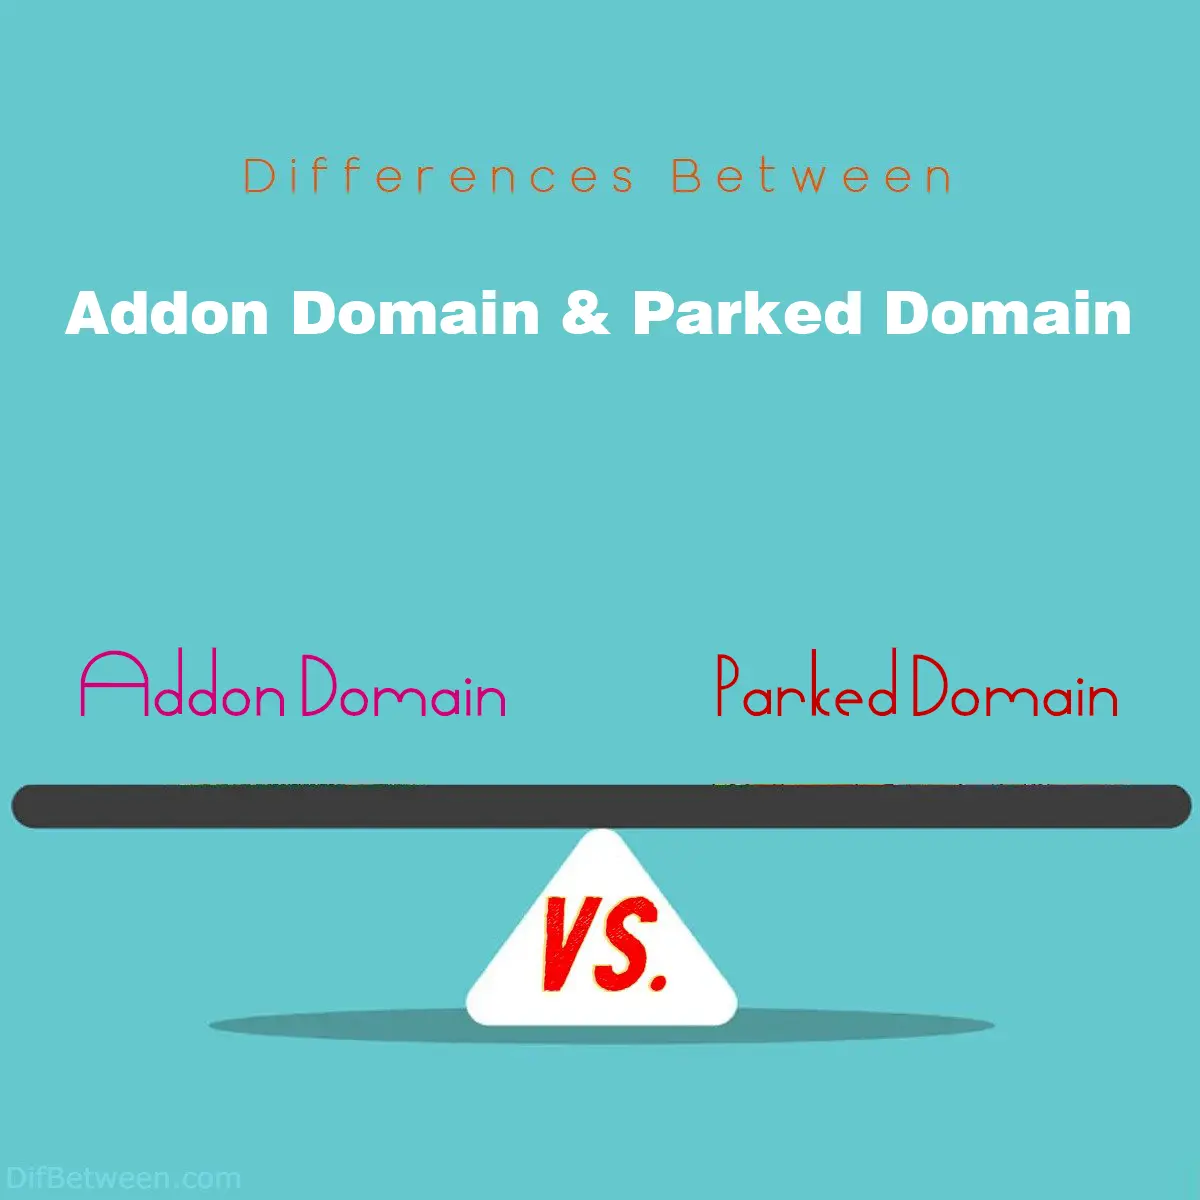 Key Differences Between Addon Domain and Parked Domain